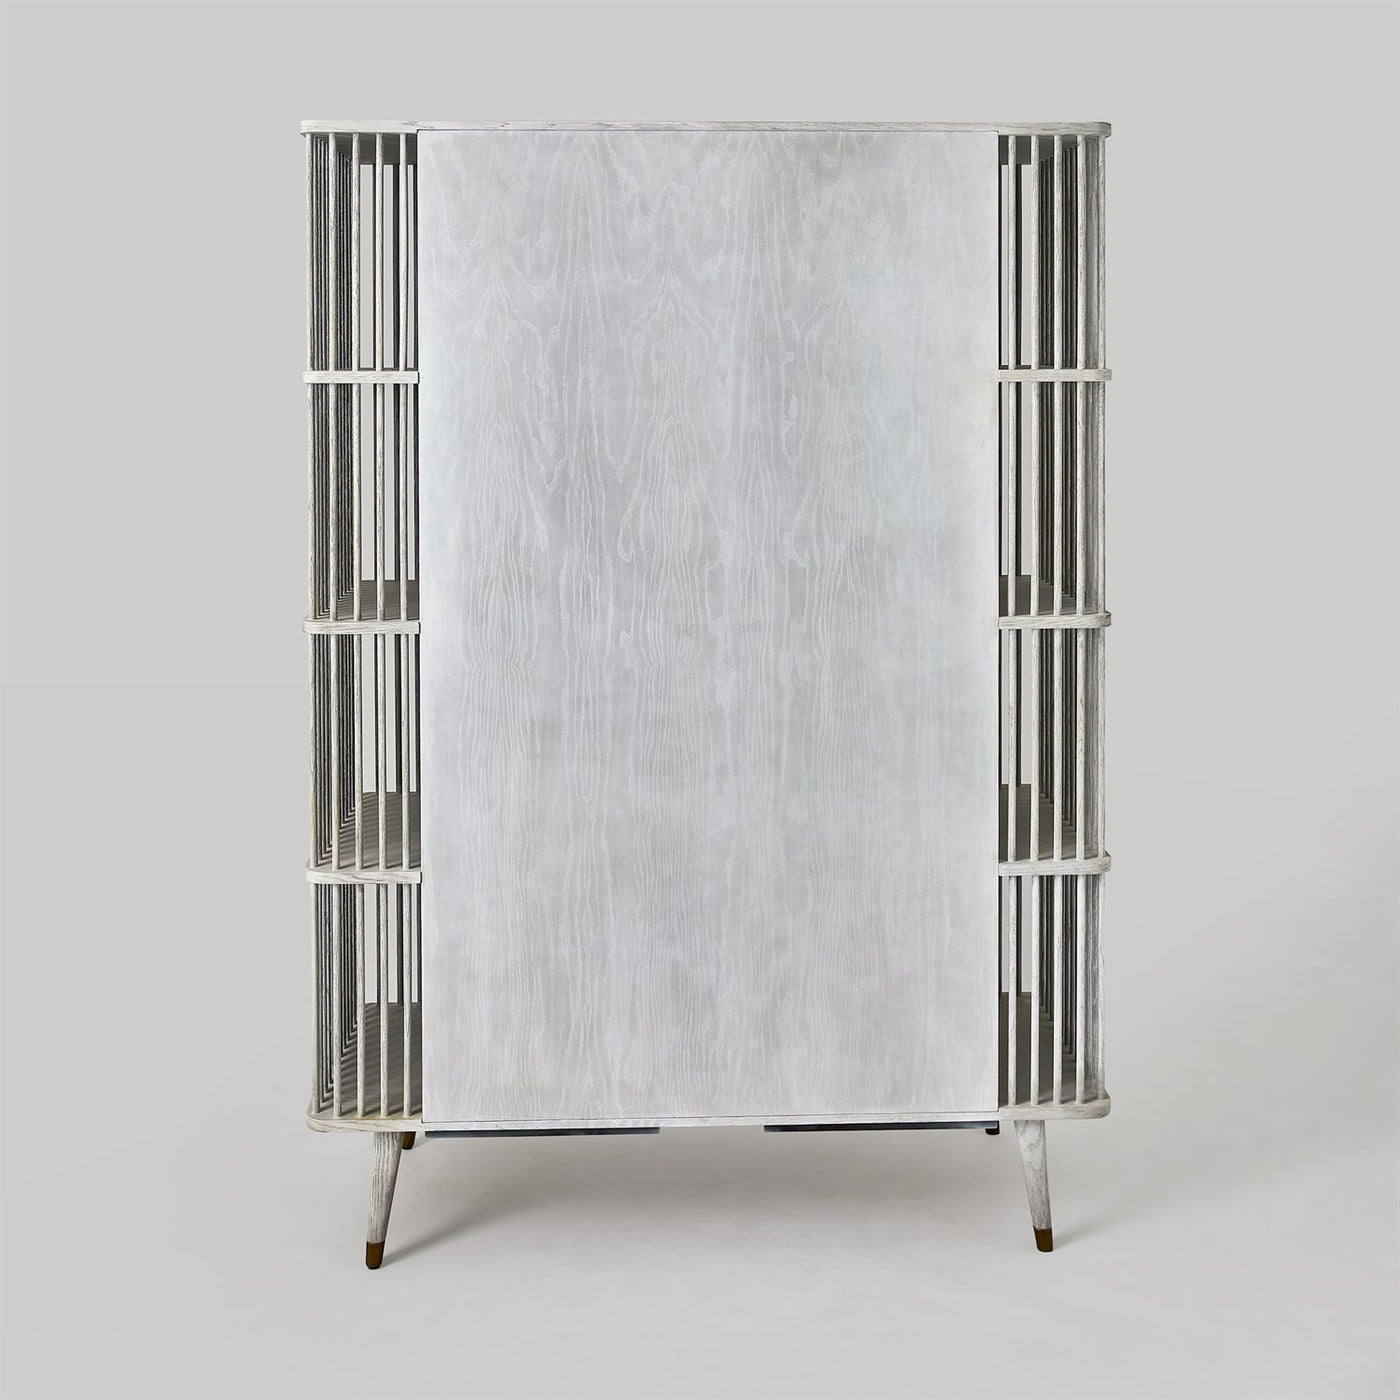 ARBOR TALL CABINET-WHITE WASHED by Global Views